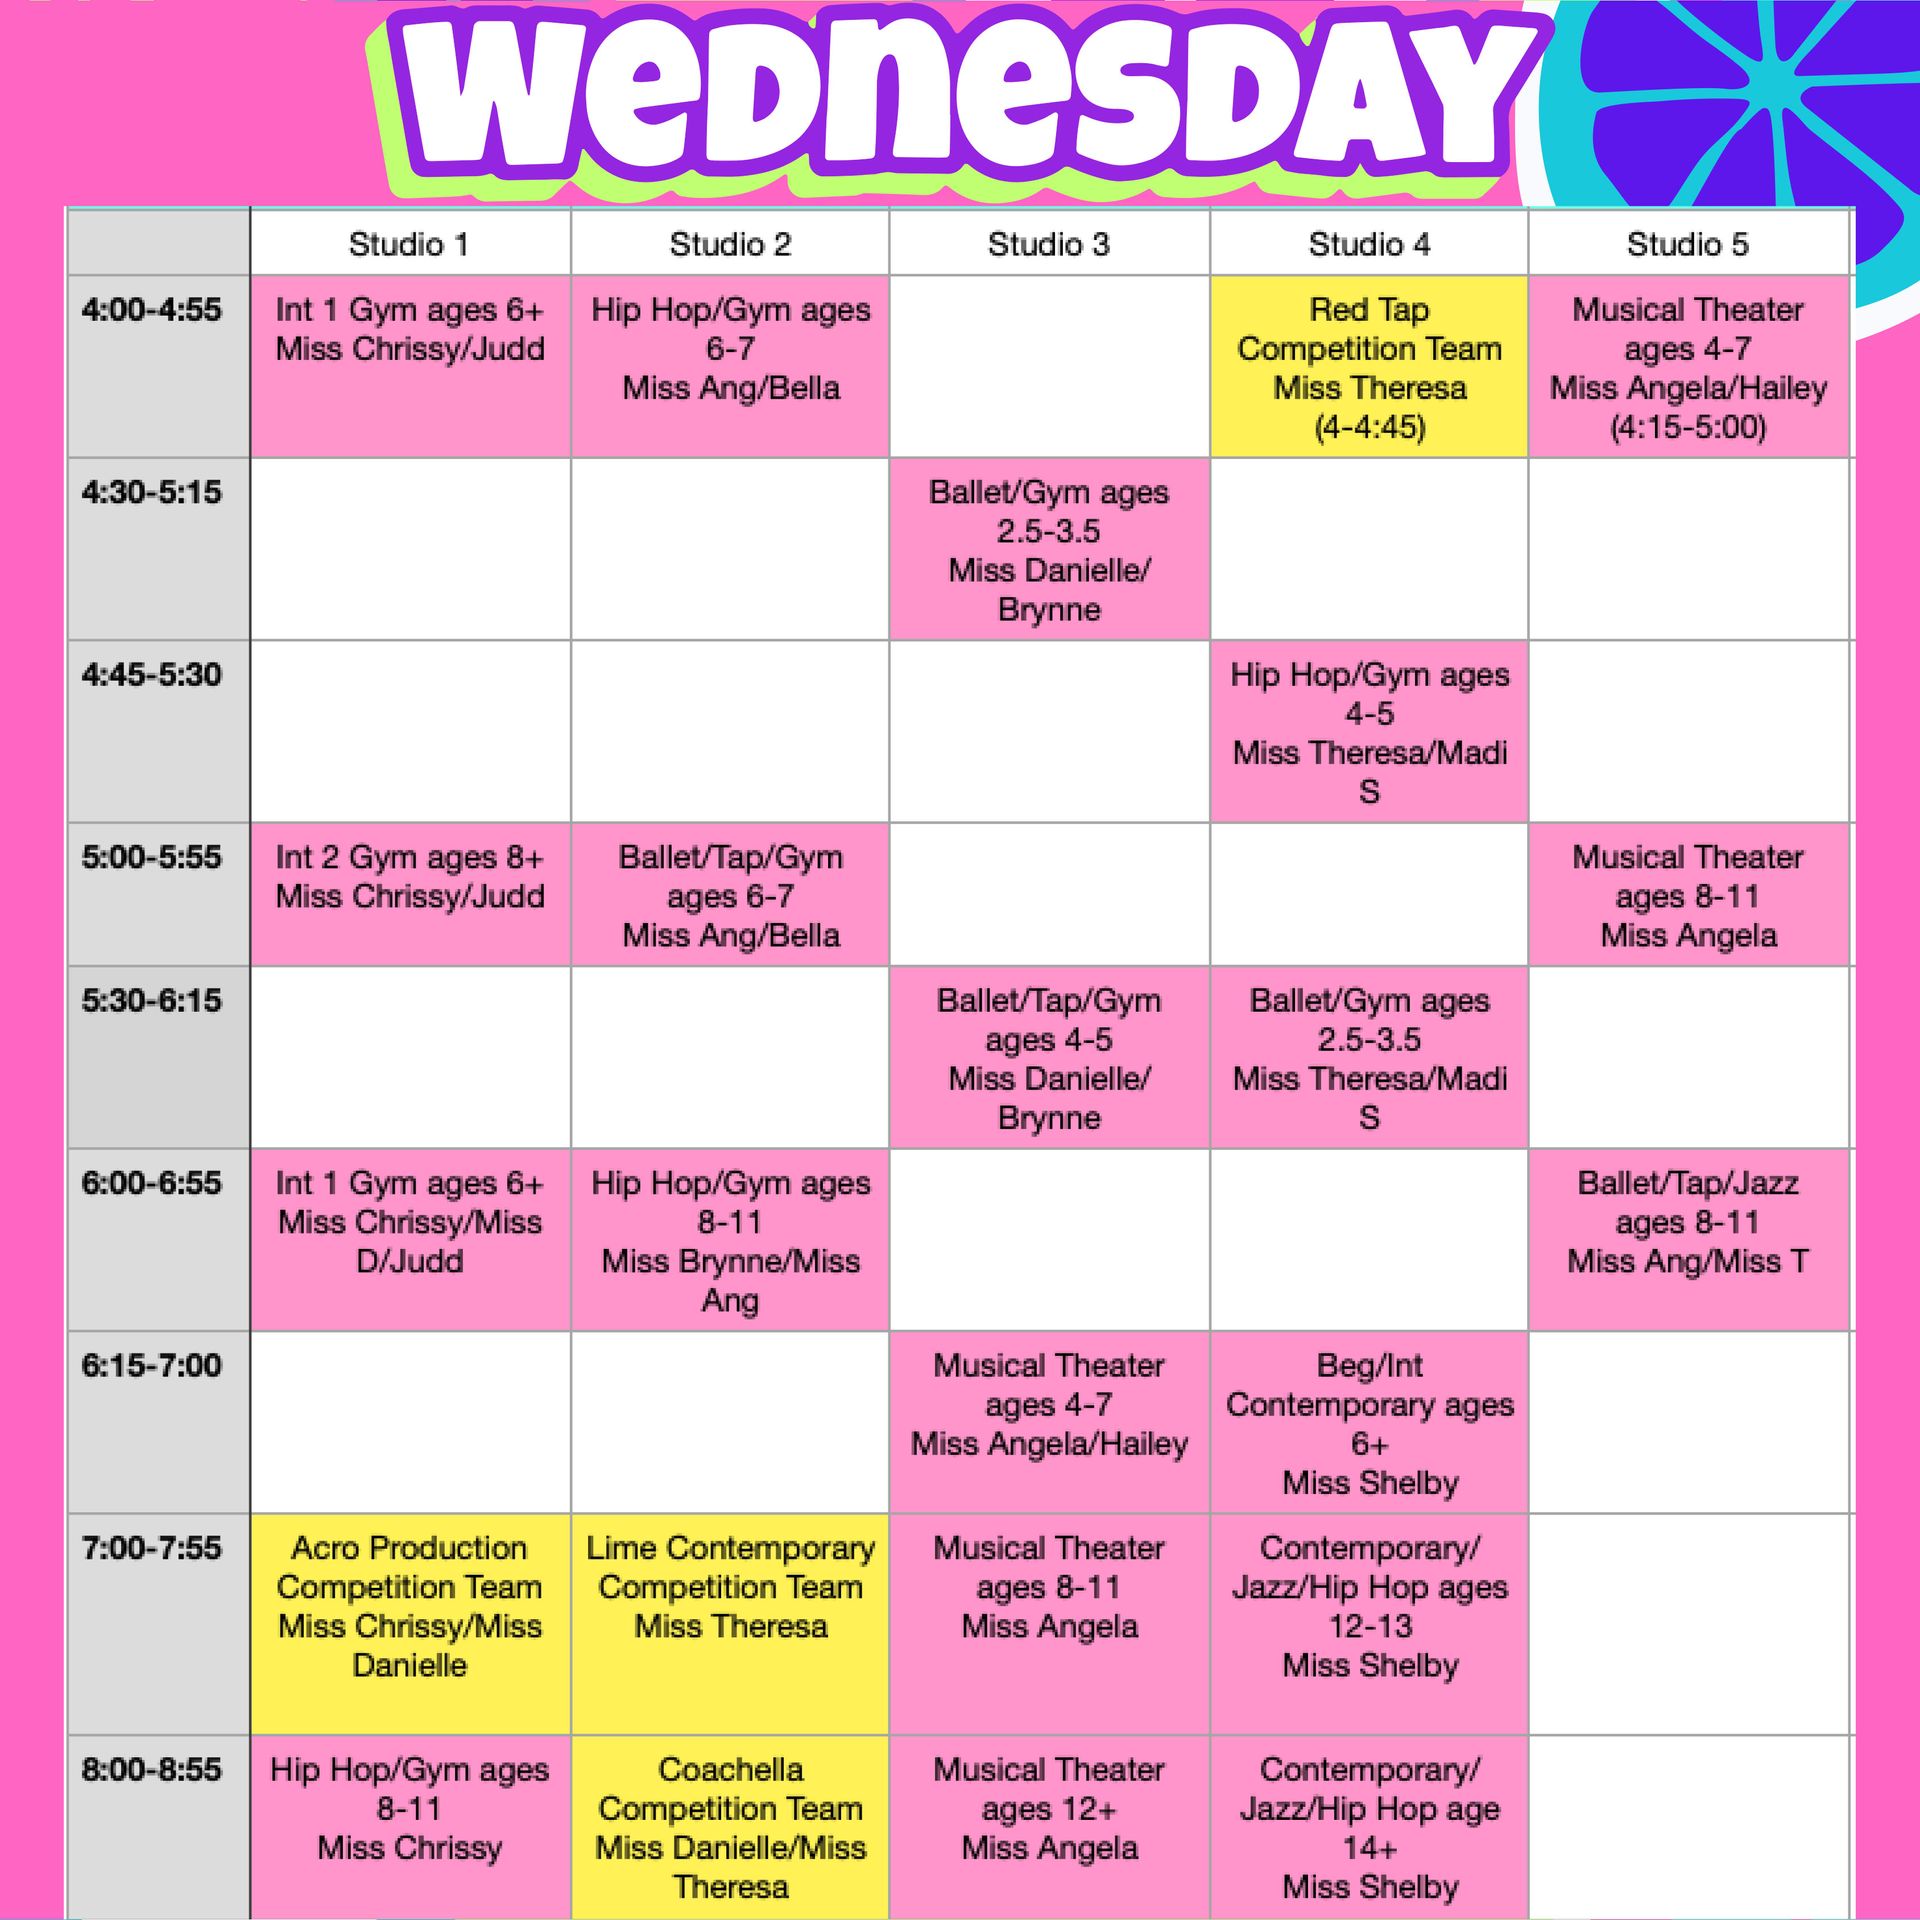 A schedule for Wednesday shows a variety of classes